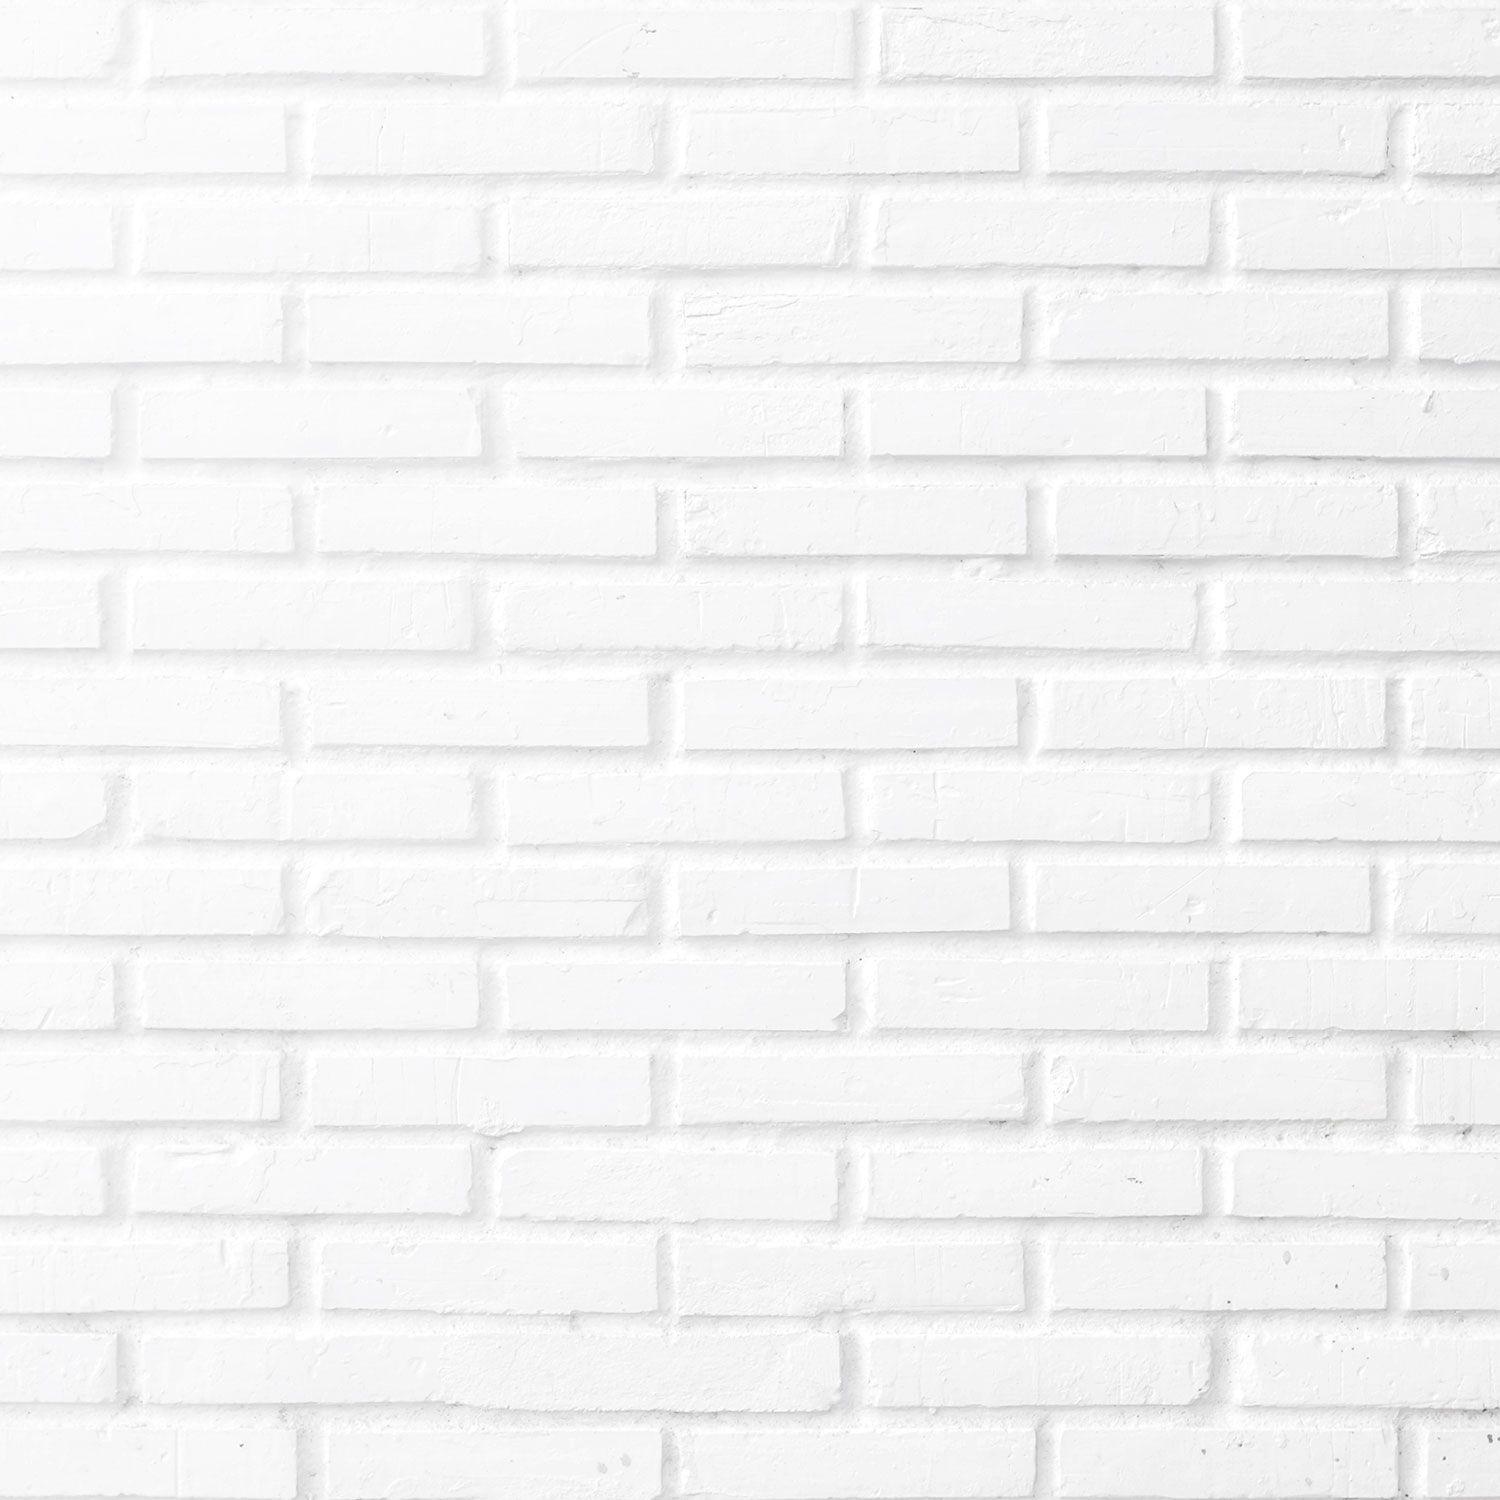 White Wall Wallpapers - Top Free White Wall Backgrounds - WallpaperAccess